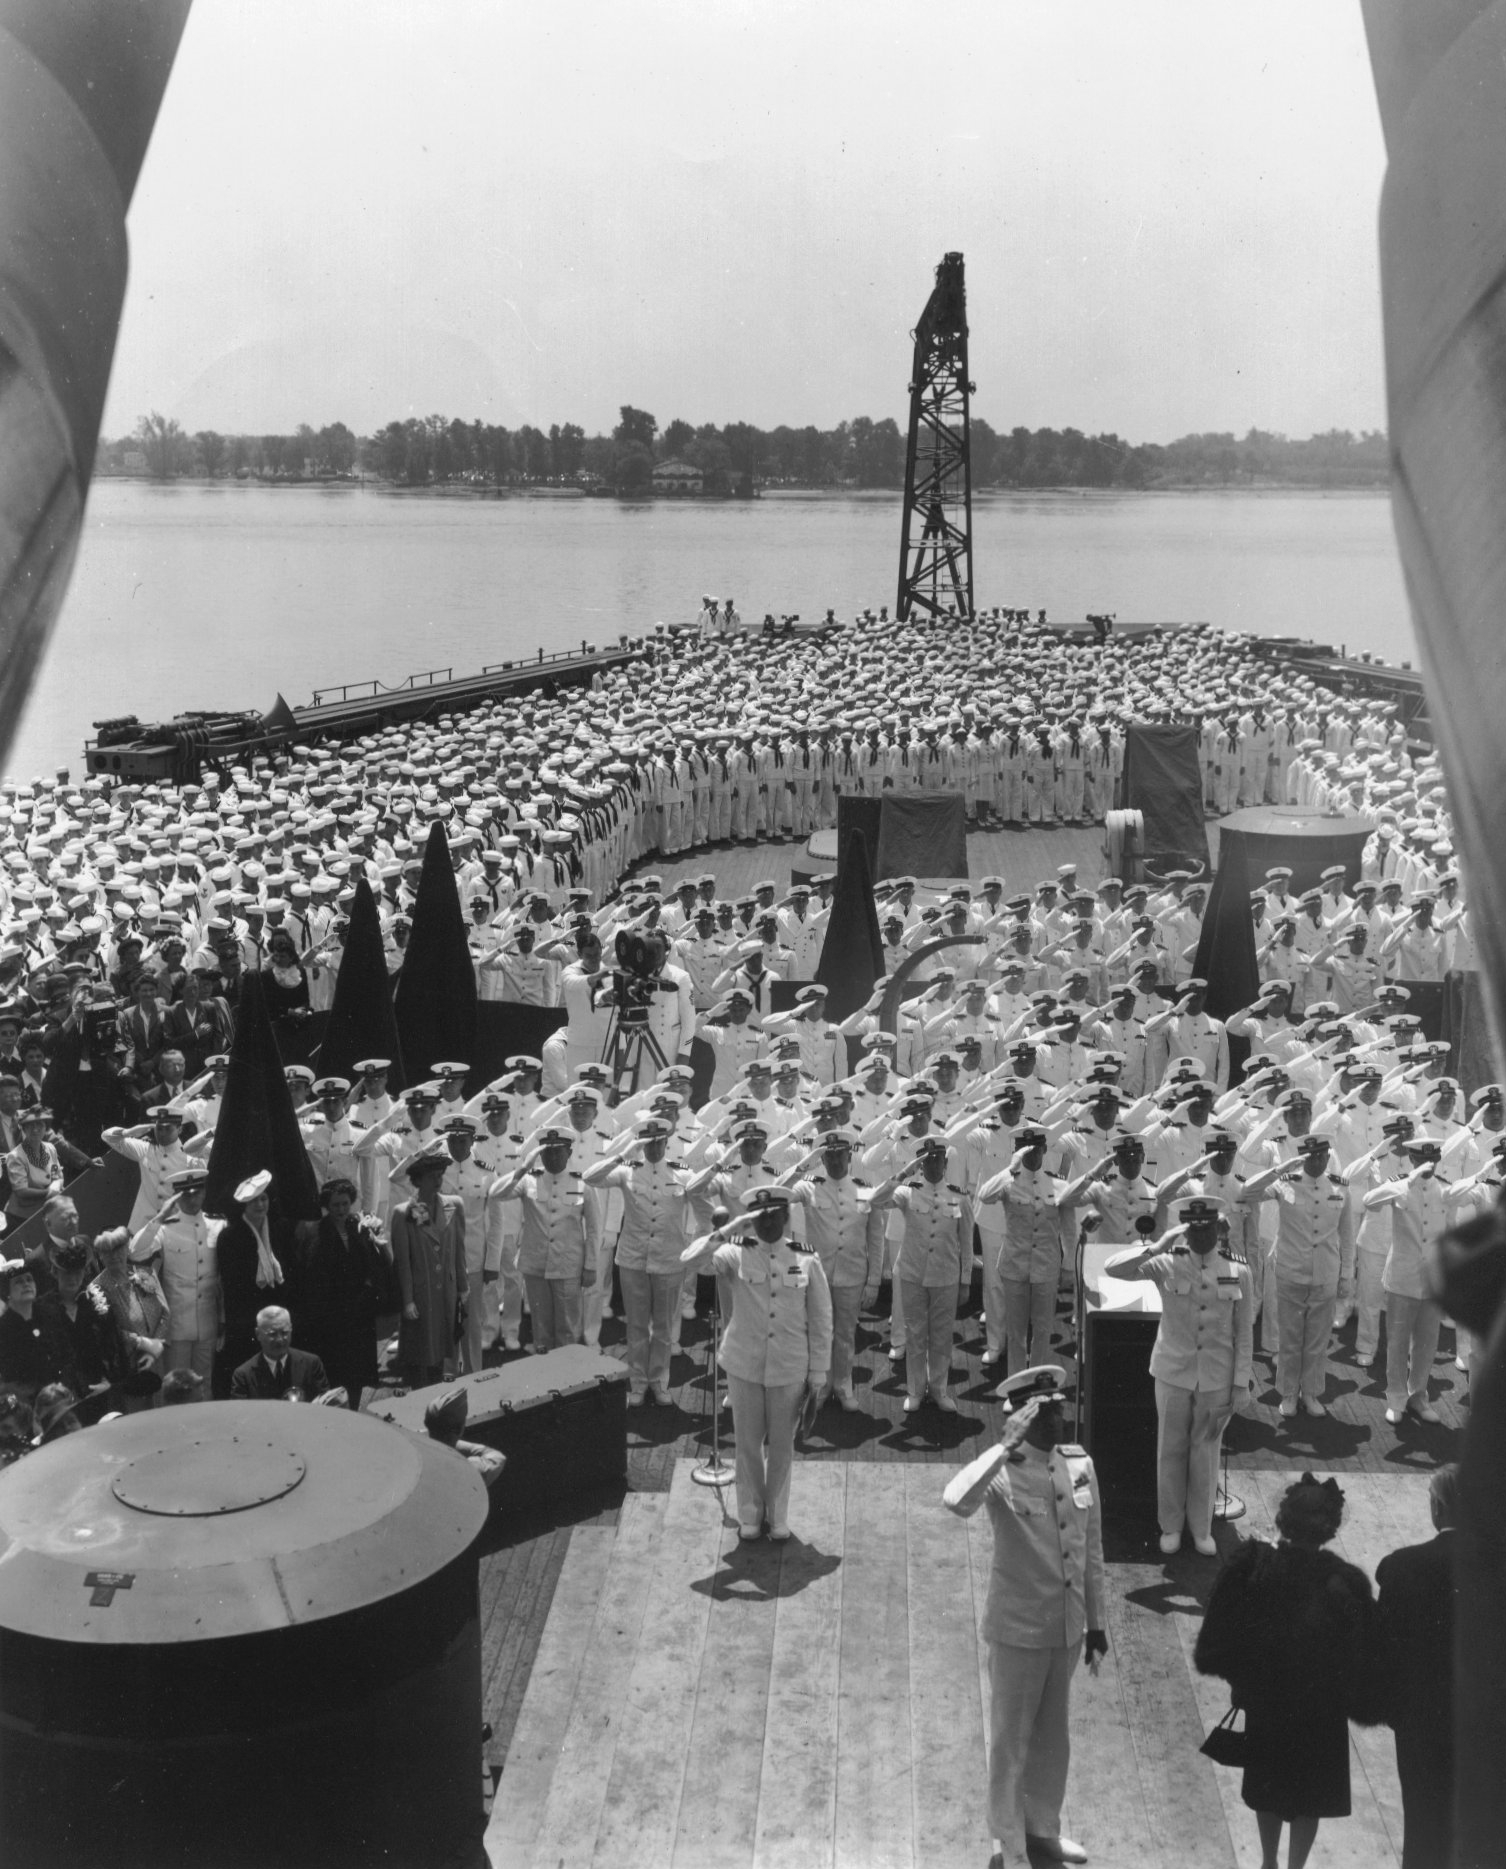 Officers saluting during the commissioning ceremony of USS New Jersey, Philadelphia Navy Yard, Pennsylvania, United States, 23 May 1943